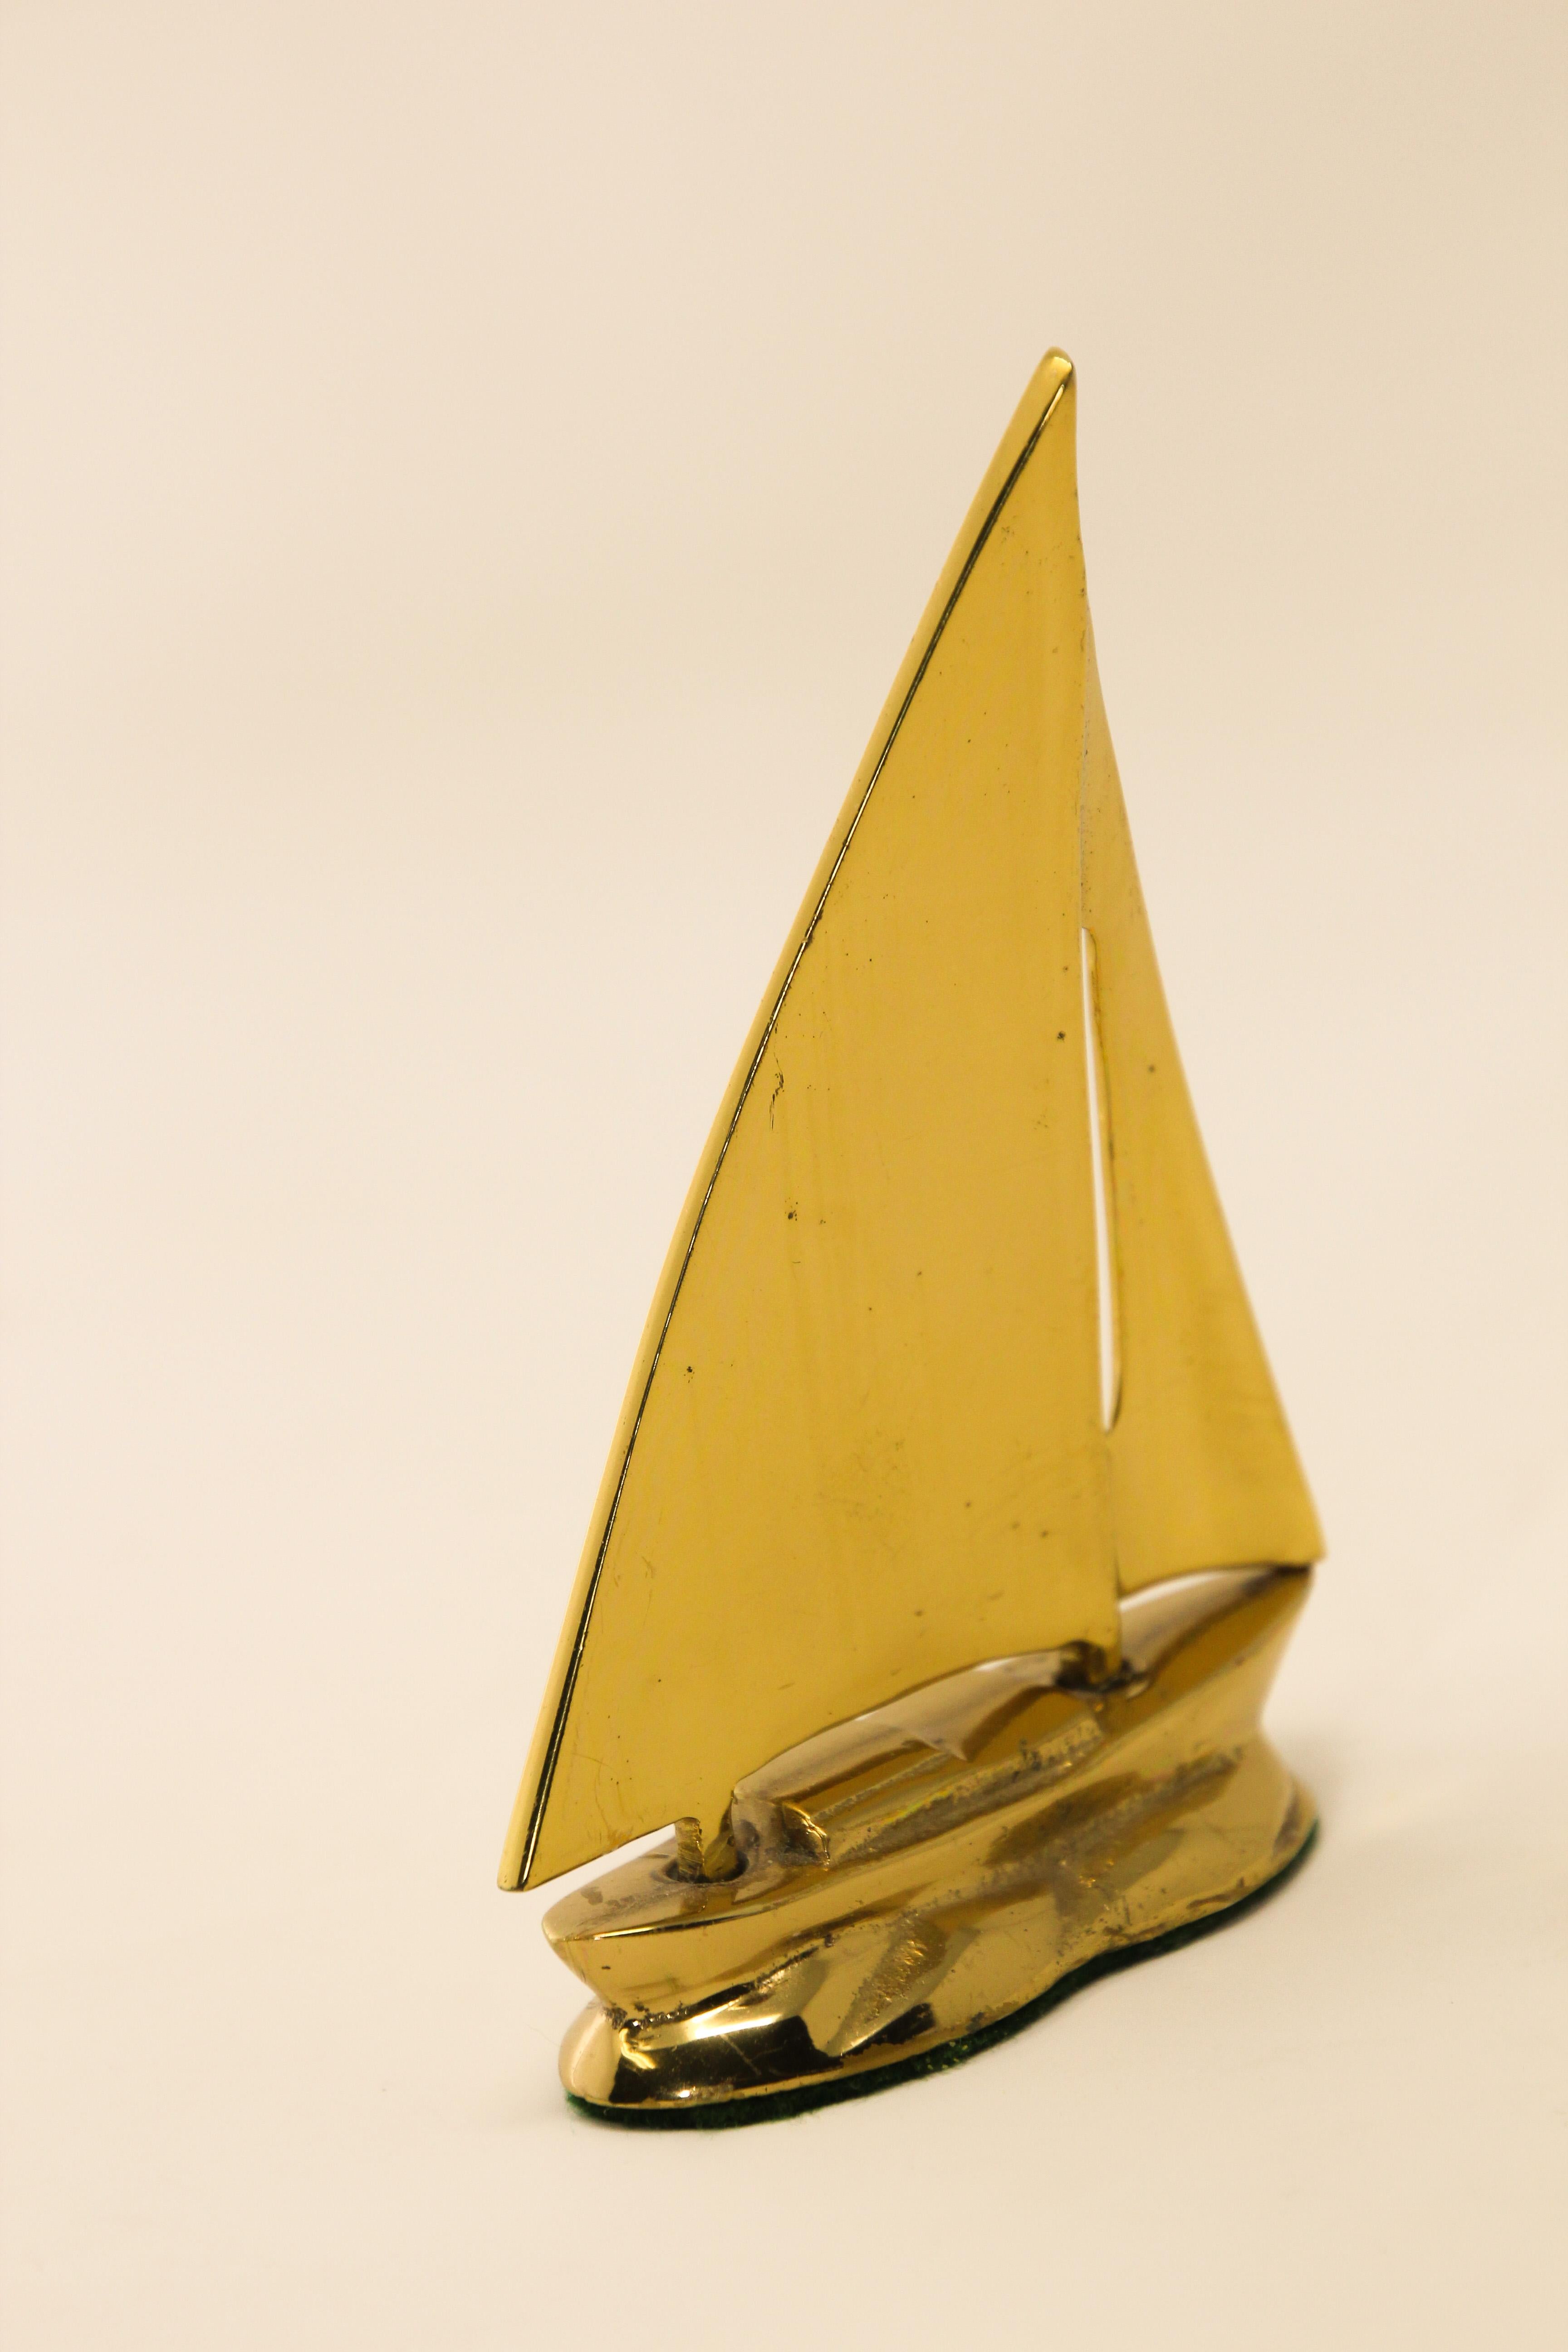 Modernist small polished brass sailboat paperweight.
A sturdy and sleek midcentury brass sailboat.
Vintage beautiful midcentury figural solid brass sailboat, figurine would be perfect for adding a touch of nautical flair to a coffee table, bookcase,